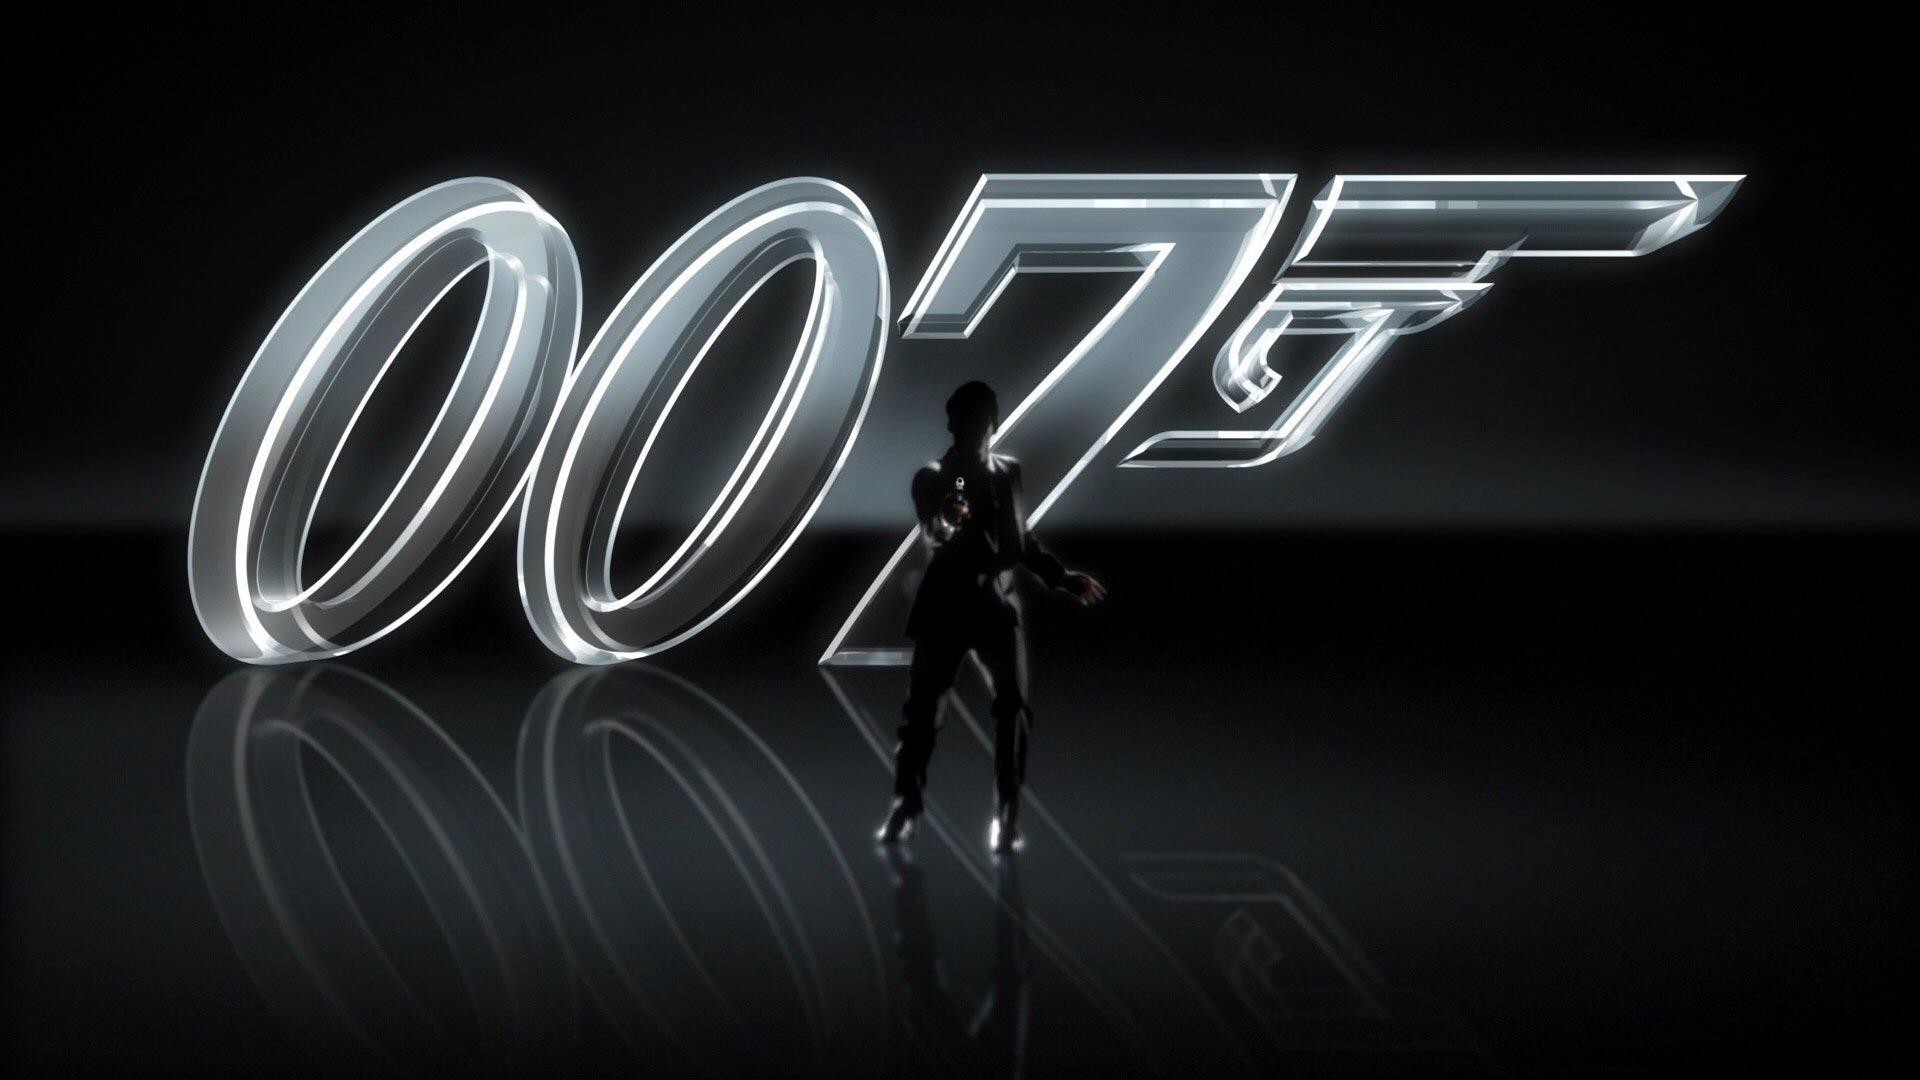 007 Wallpaper 65 Pictures